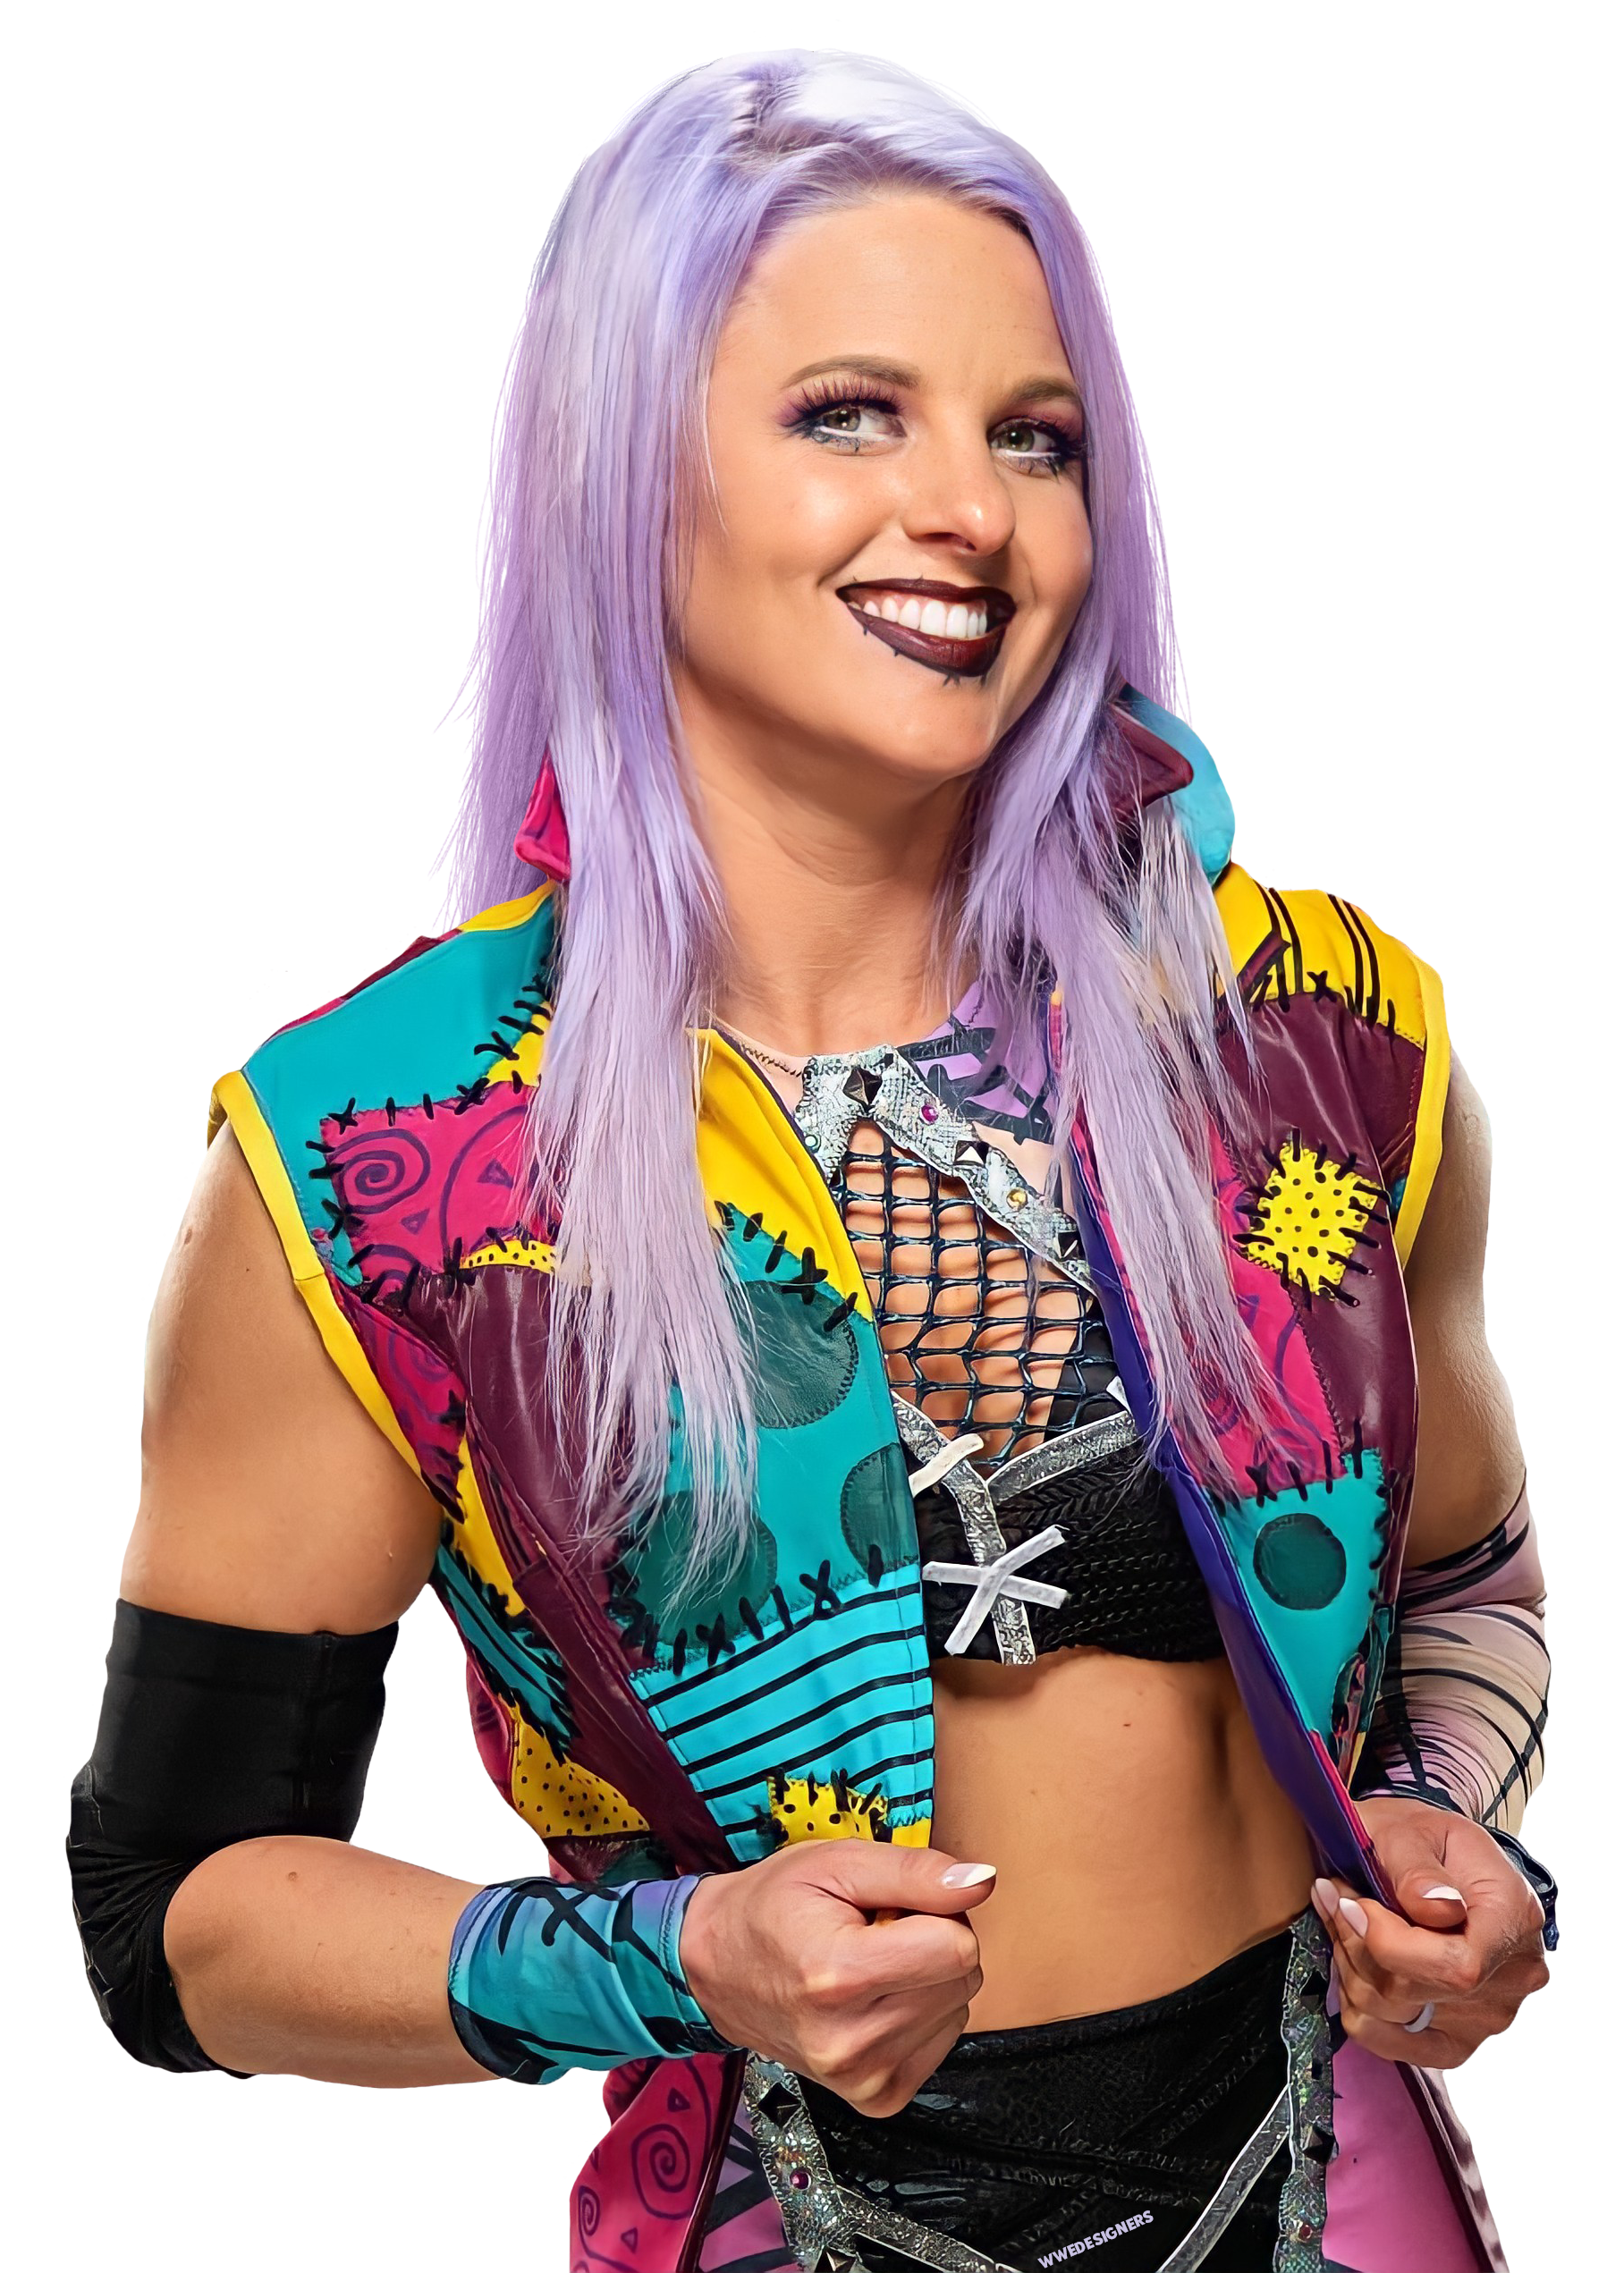 Candice LeRae 2020 New Render By WWE Designers by WWEDESIGNERS on DeviantArt